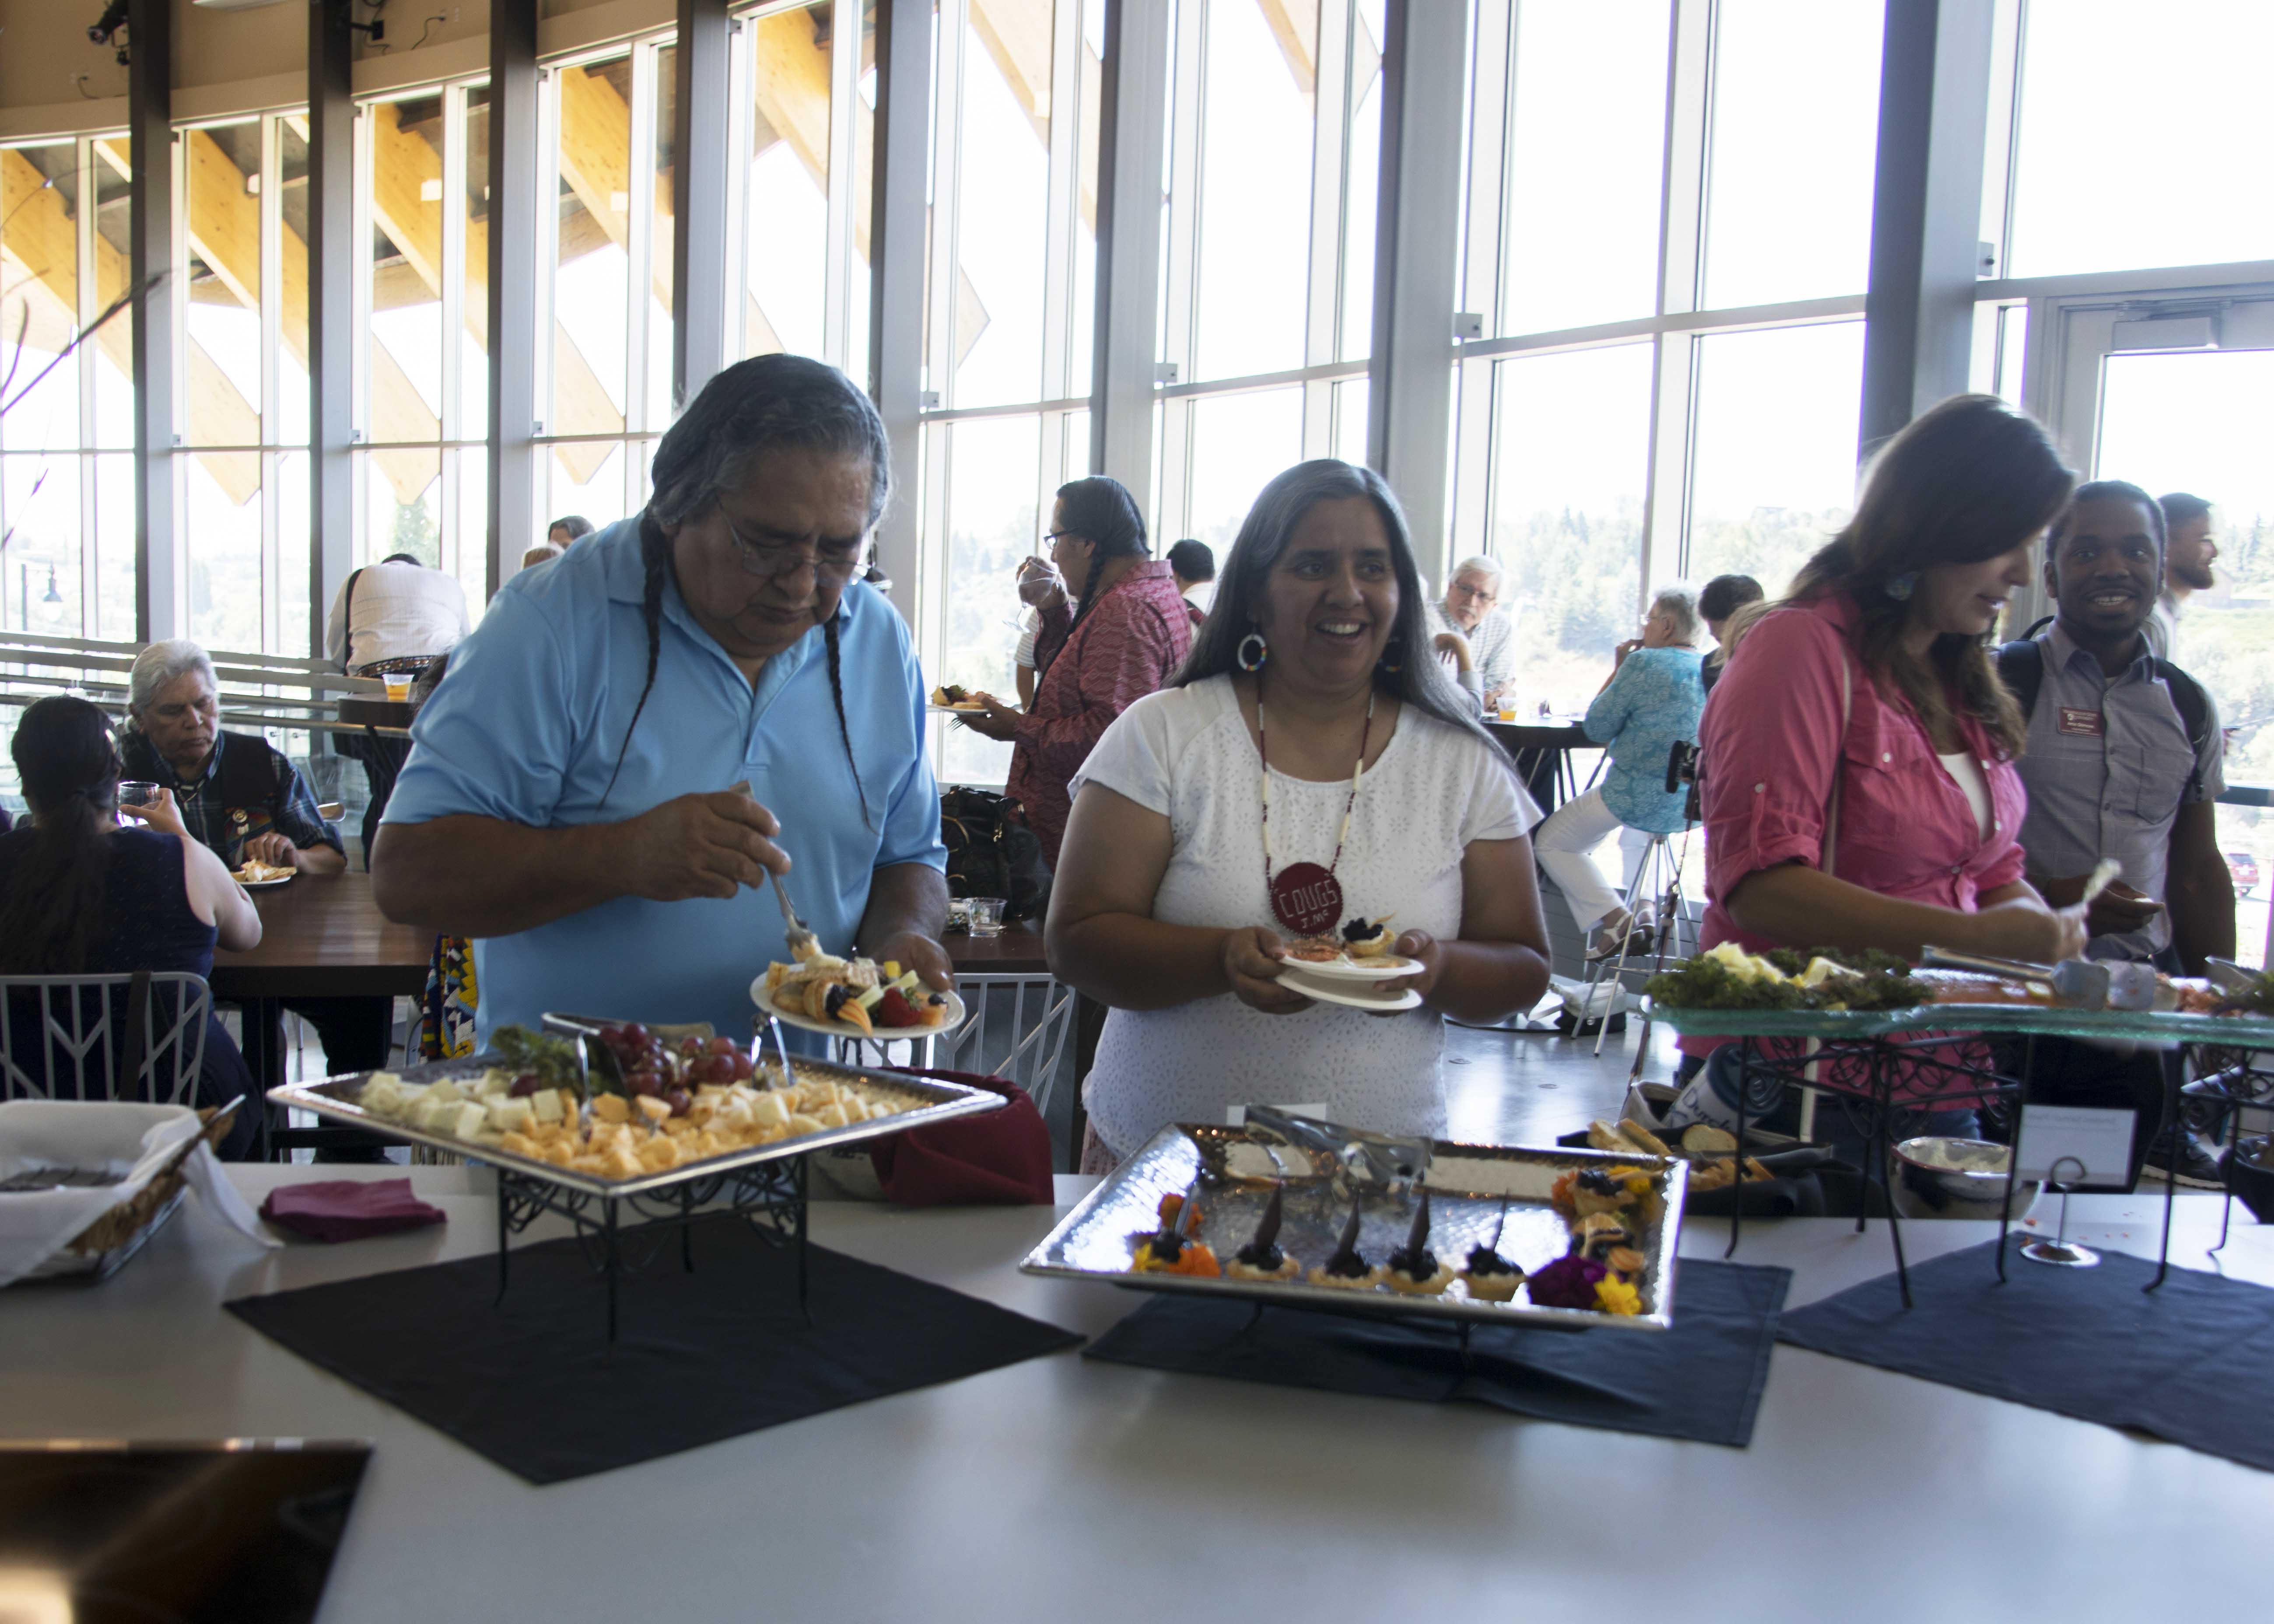 Guests enjoying light refreshments in the Cultural Center kitchen area.